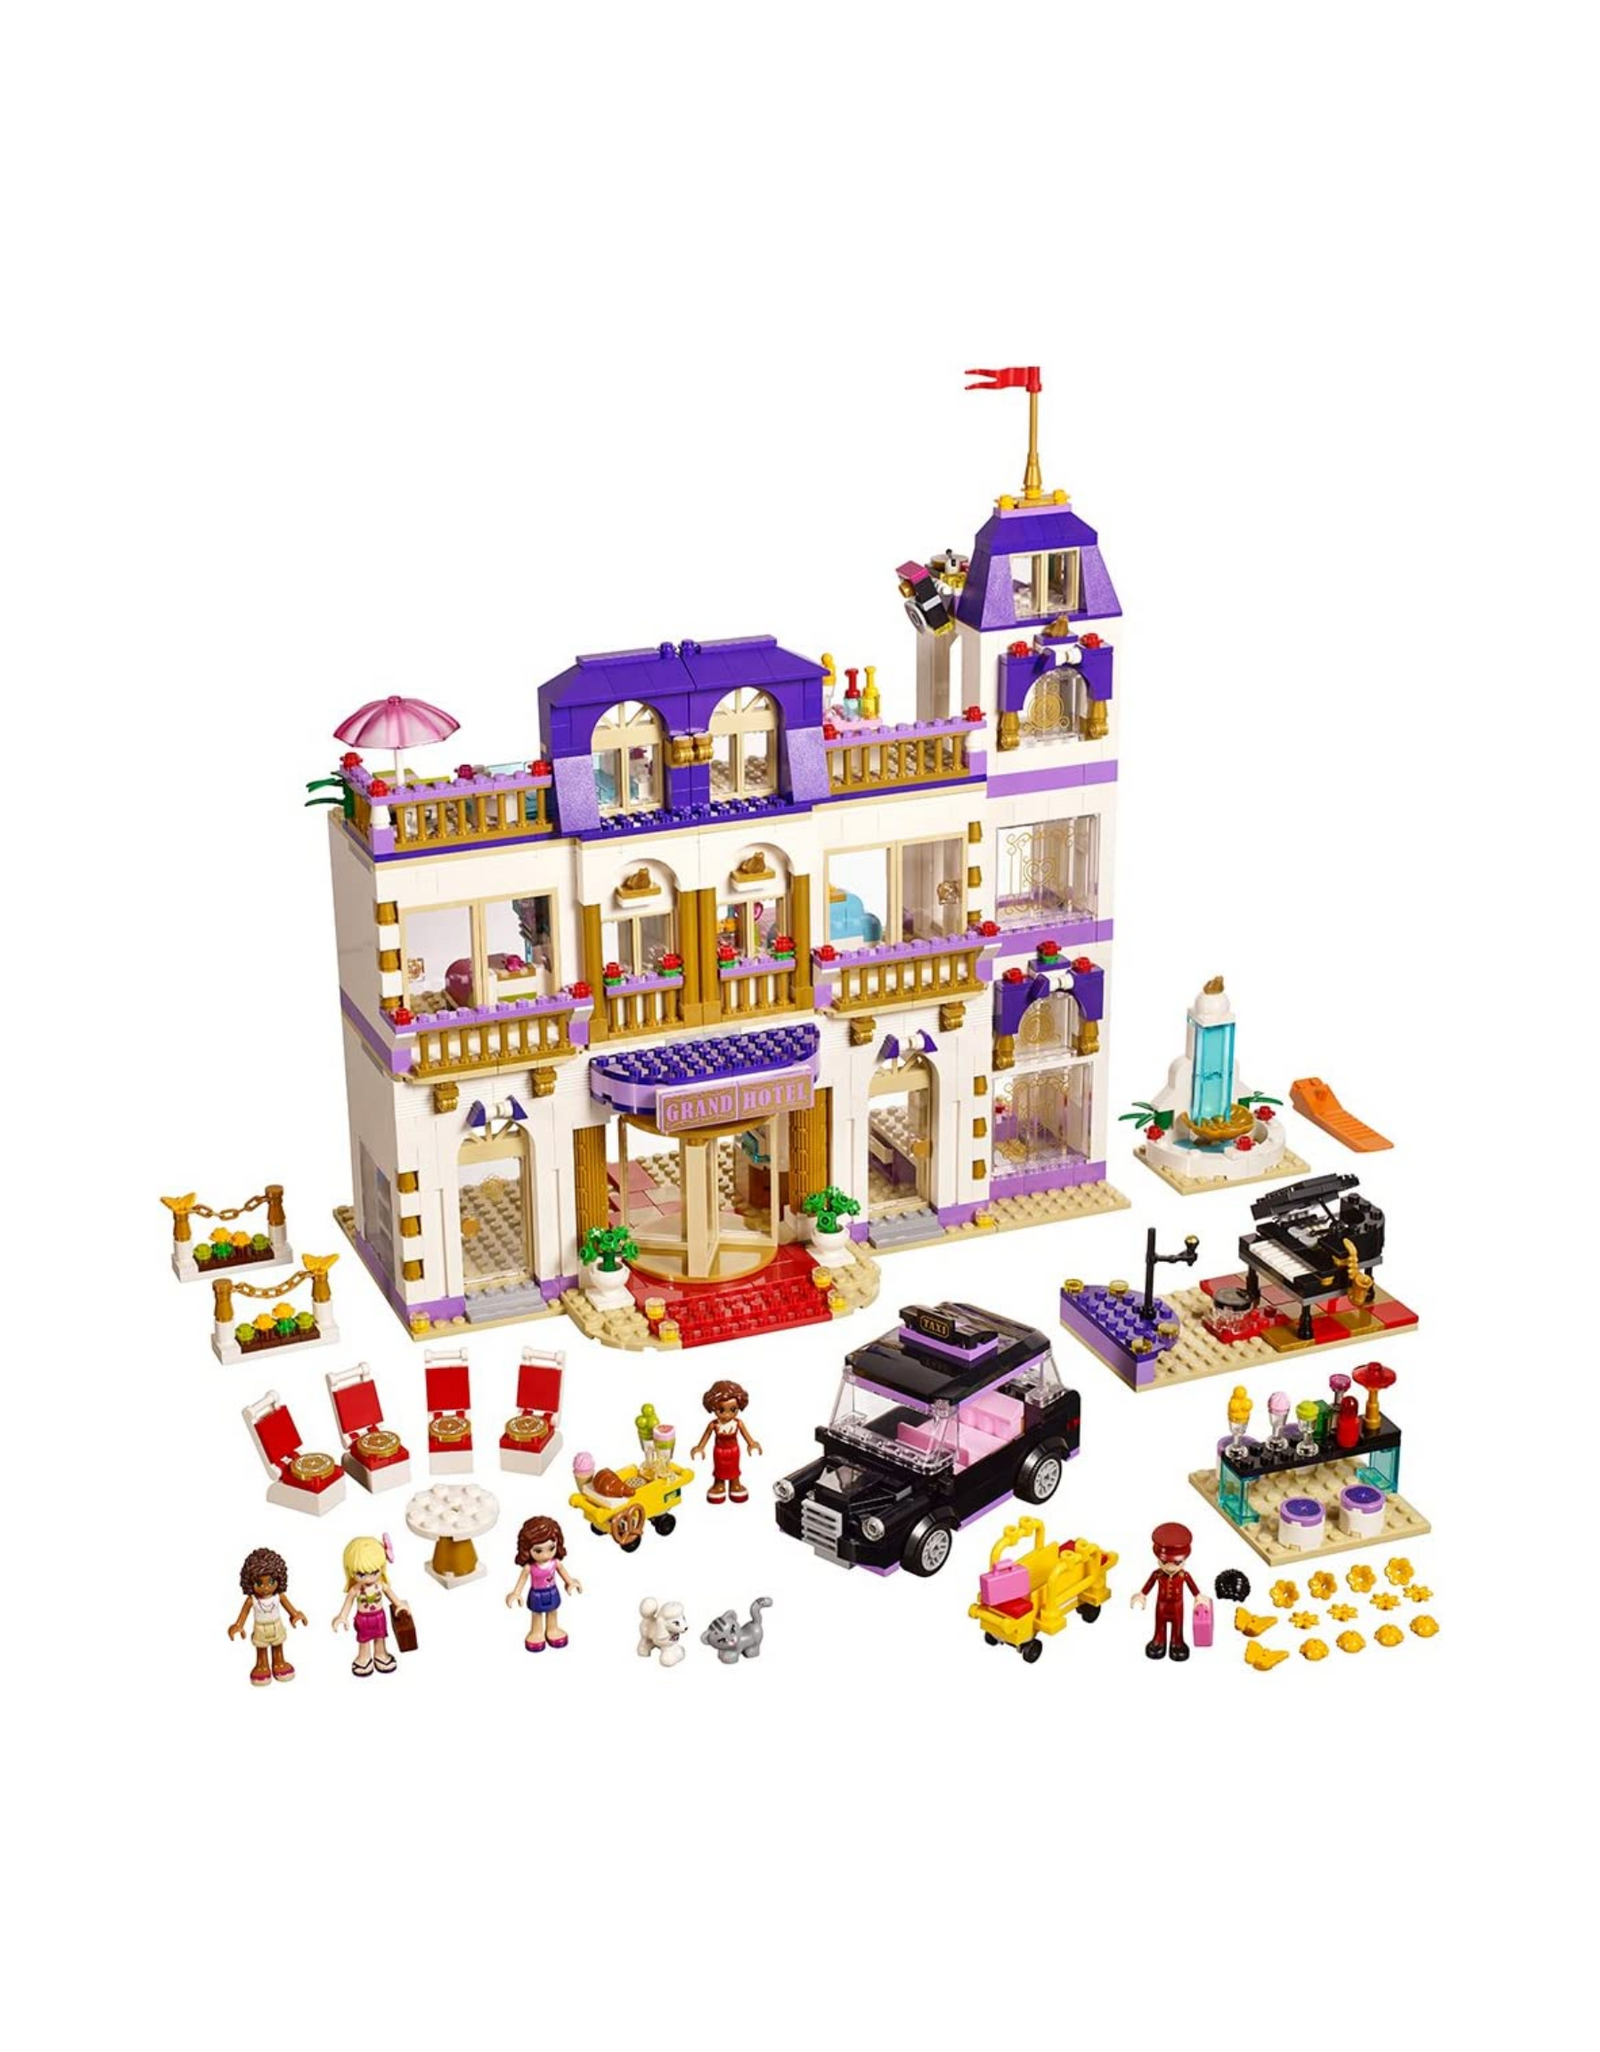 LEGO Friends 41101 Heartlake Grand Hotel Building Kit, 1552 pieces